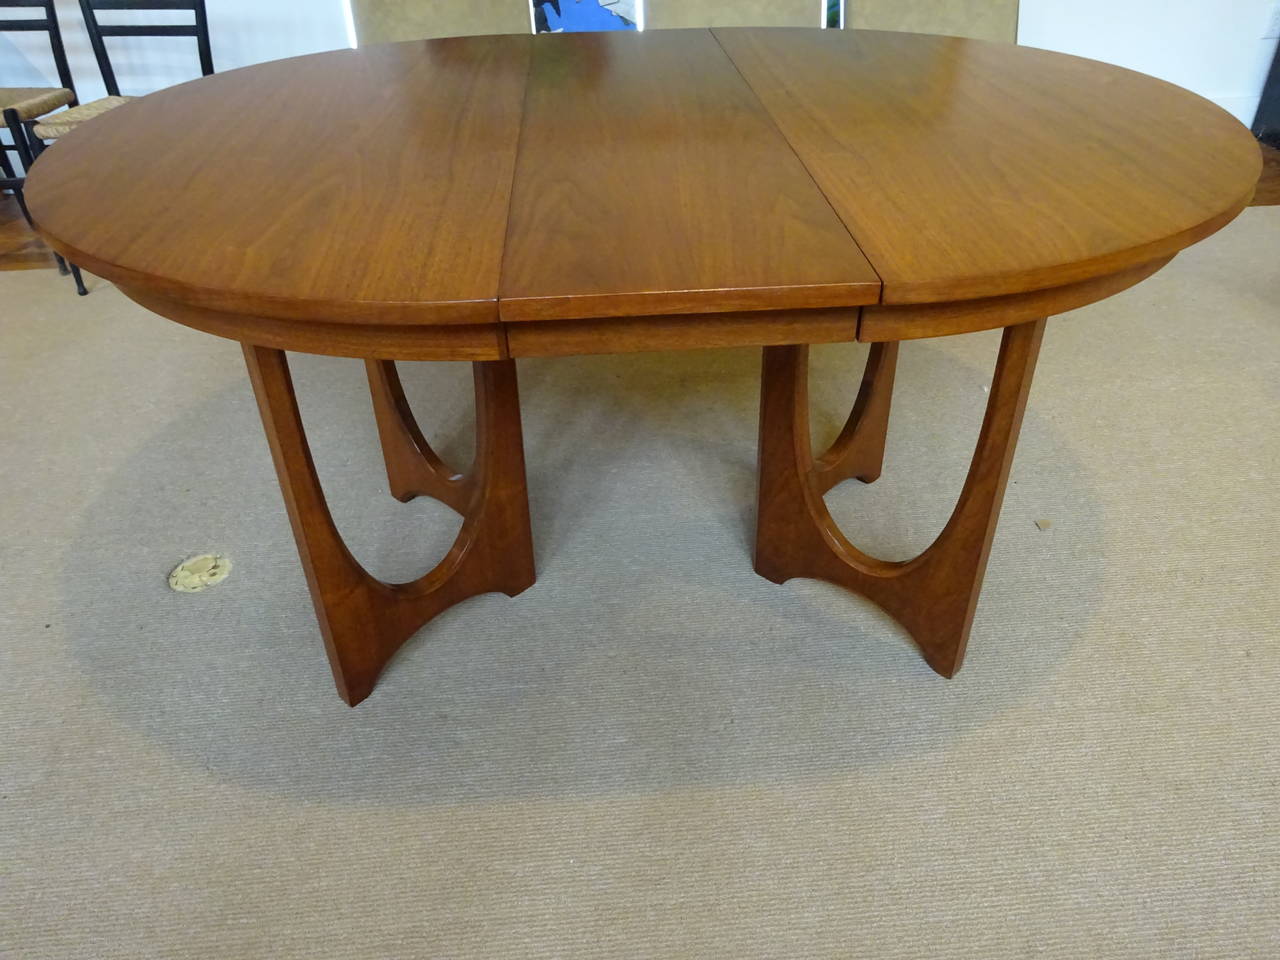 A handsome Harvery Probber style walnut dining room table with two 23.75